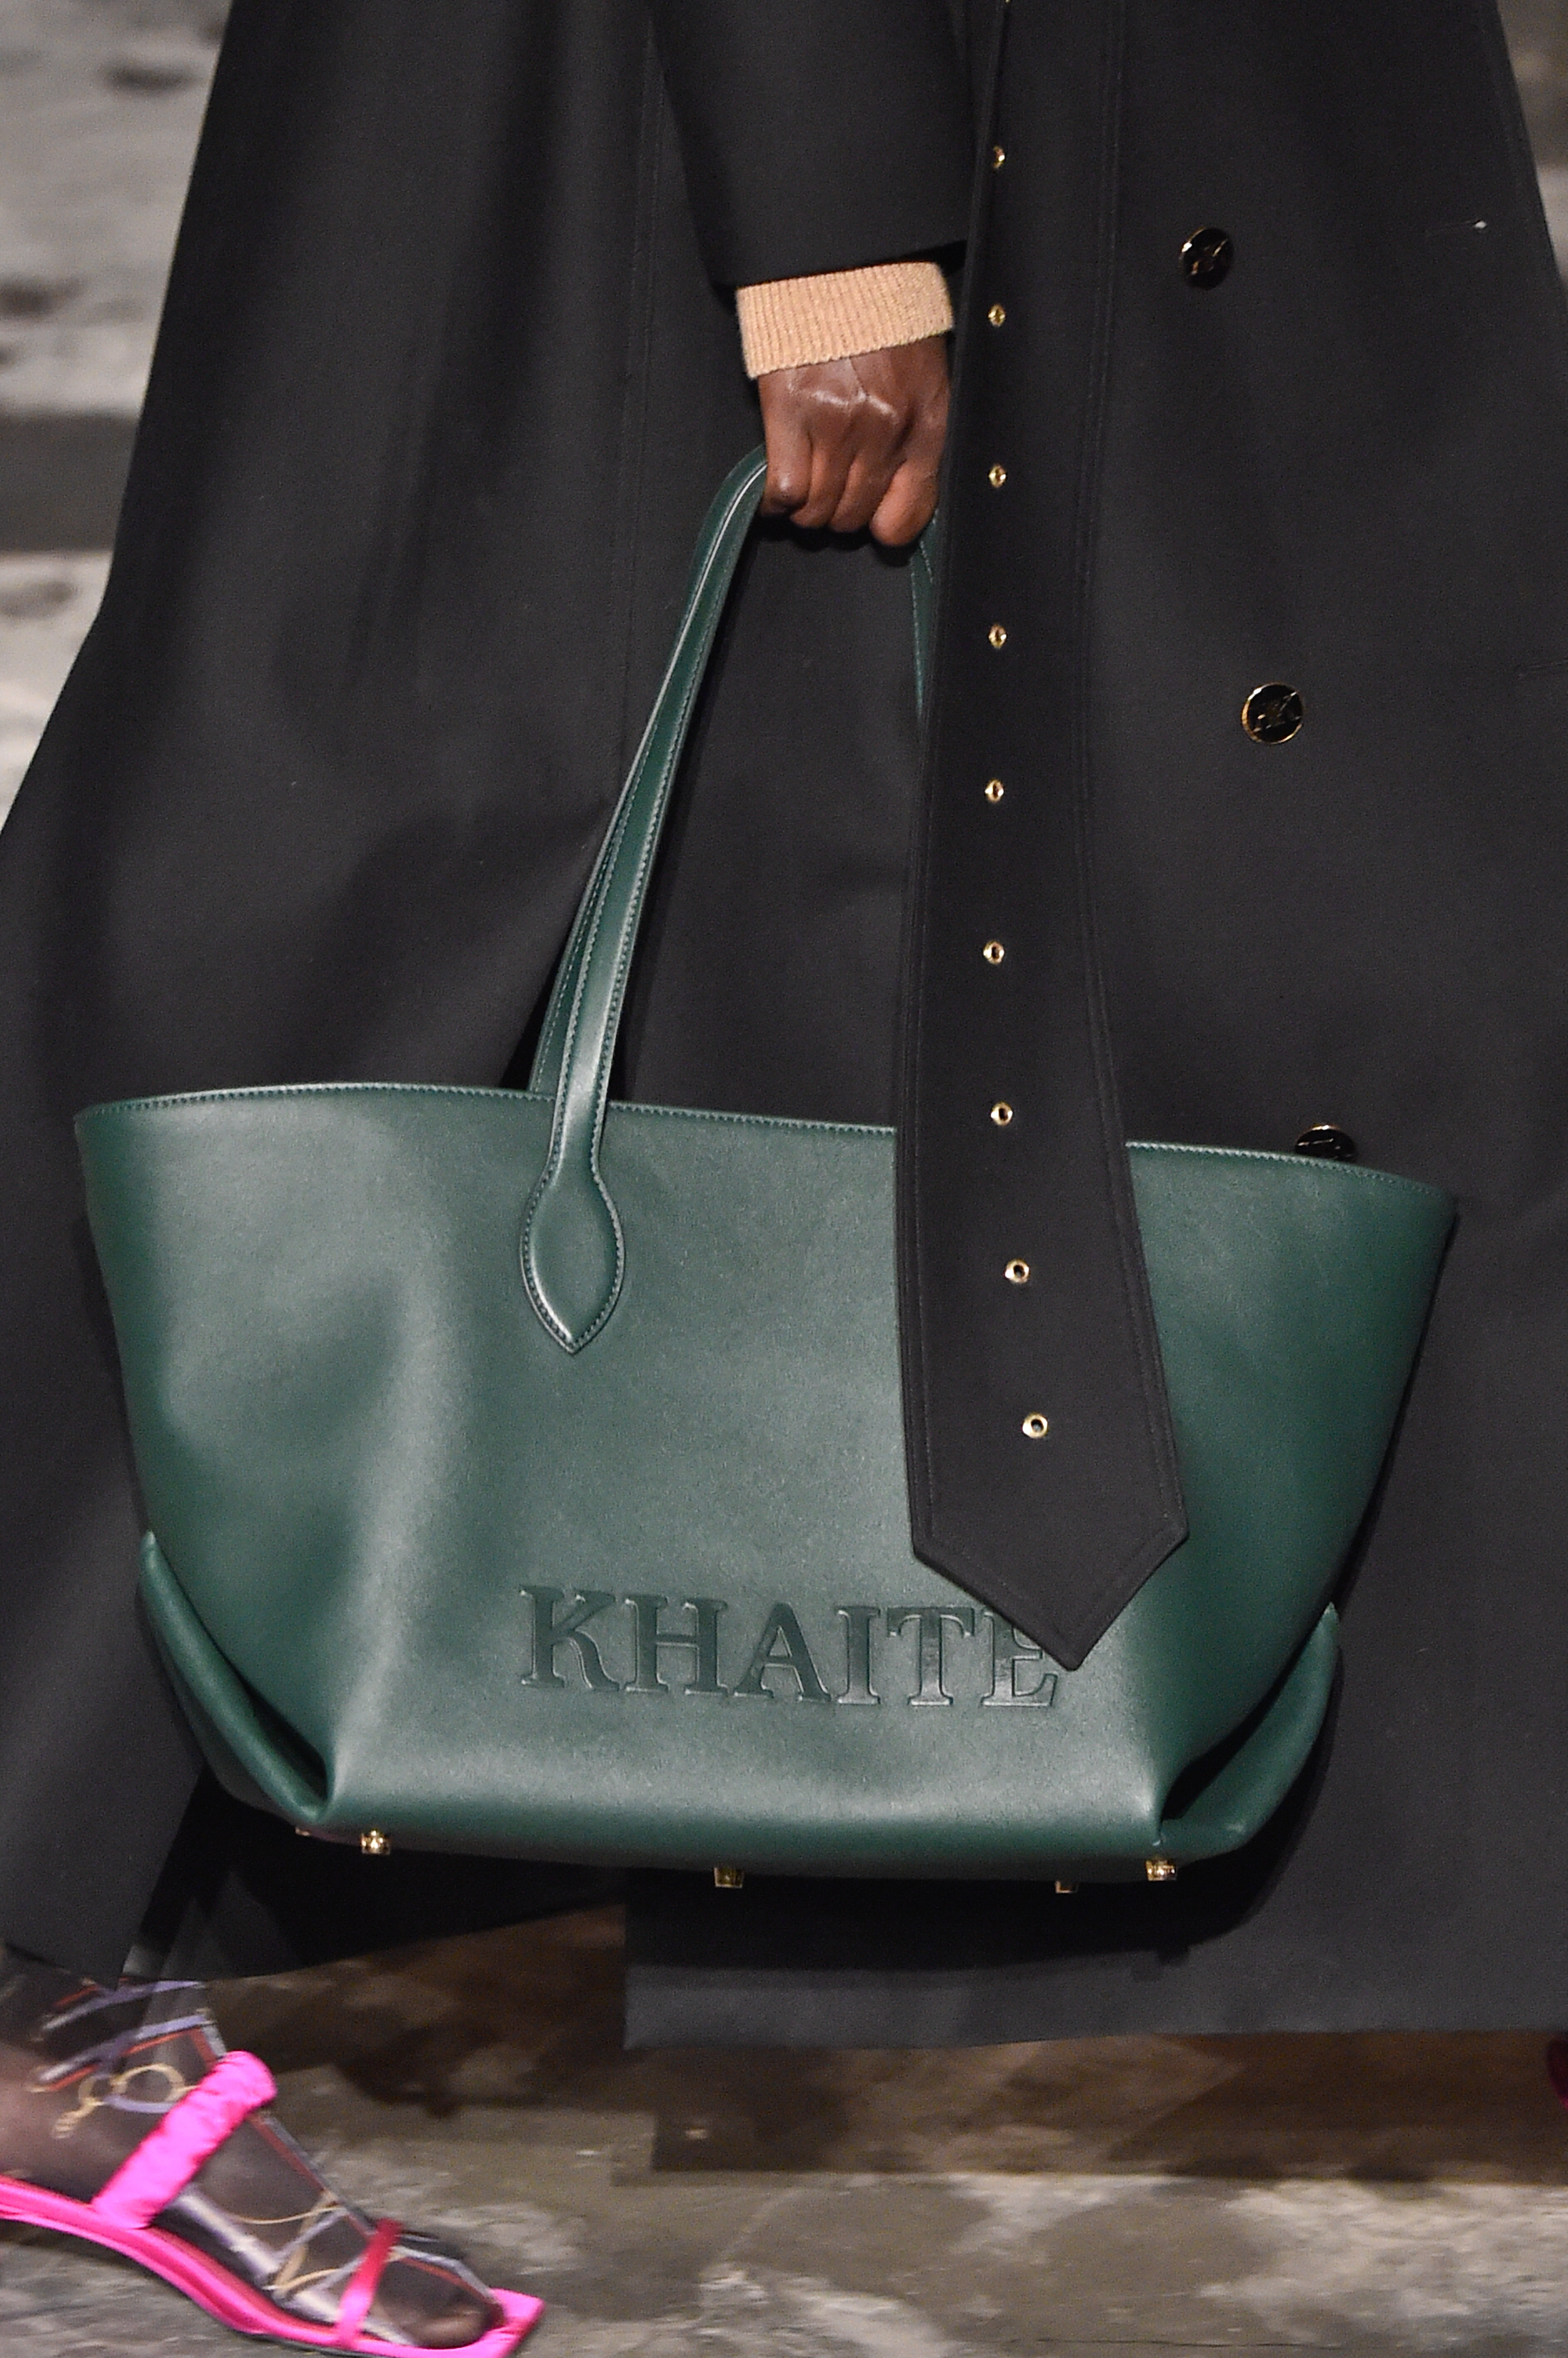 A Closer Look at the Handbags That Debuted on Khaite's Runway Tonight